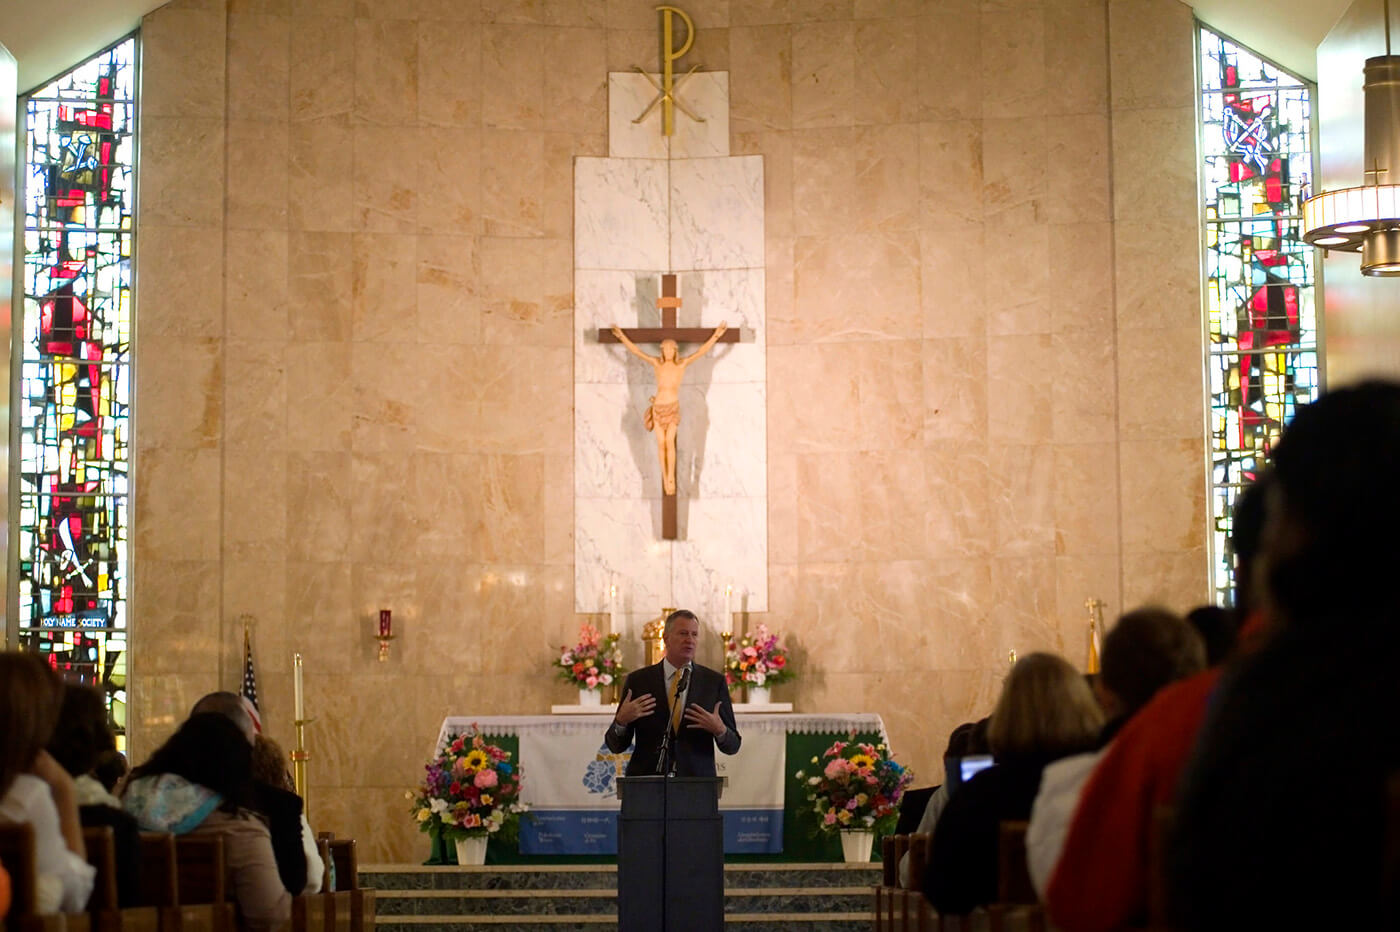 Mayor de Blasio speaks about affordable housing at East New York’s Saint Rita’s Catholic Church in October 2016. Photo via the New York City Mayoral Photography Office